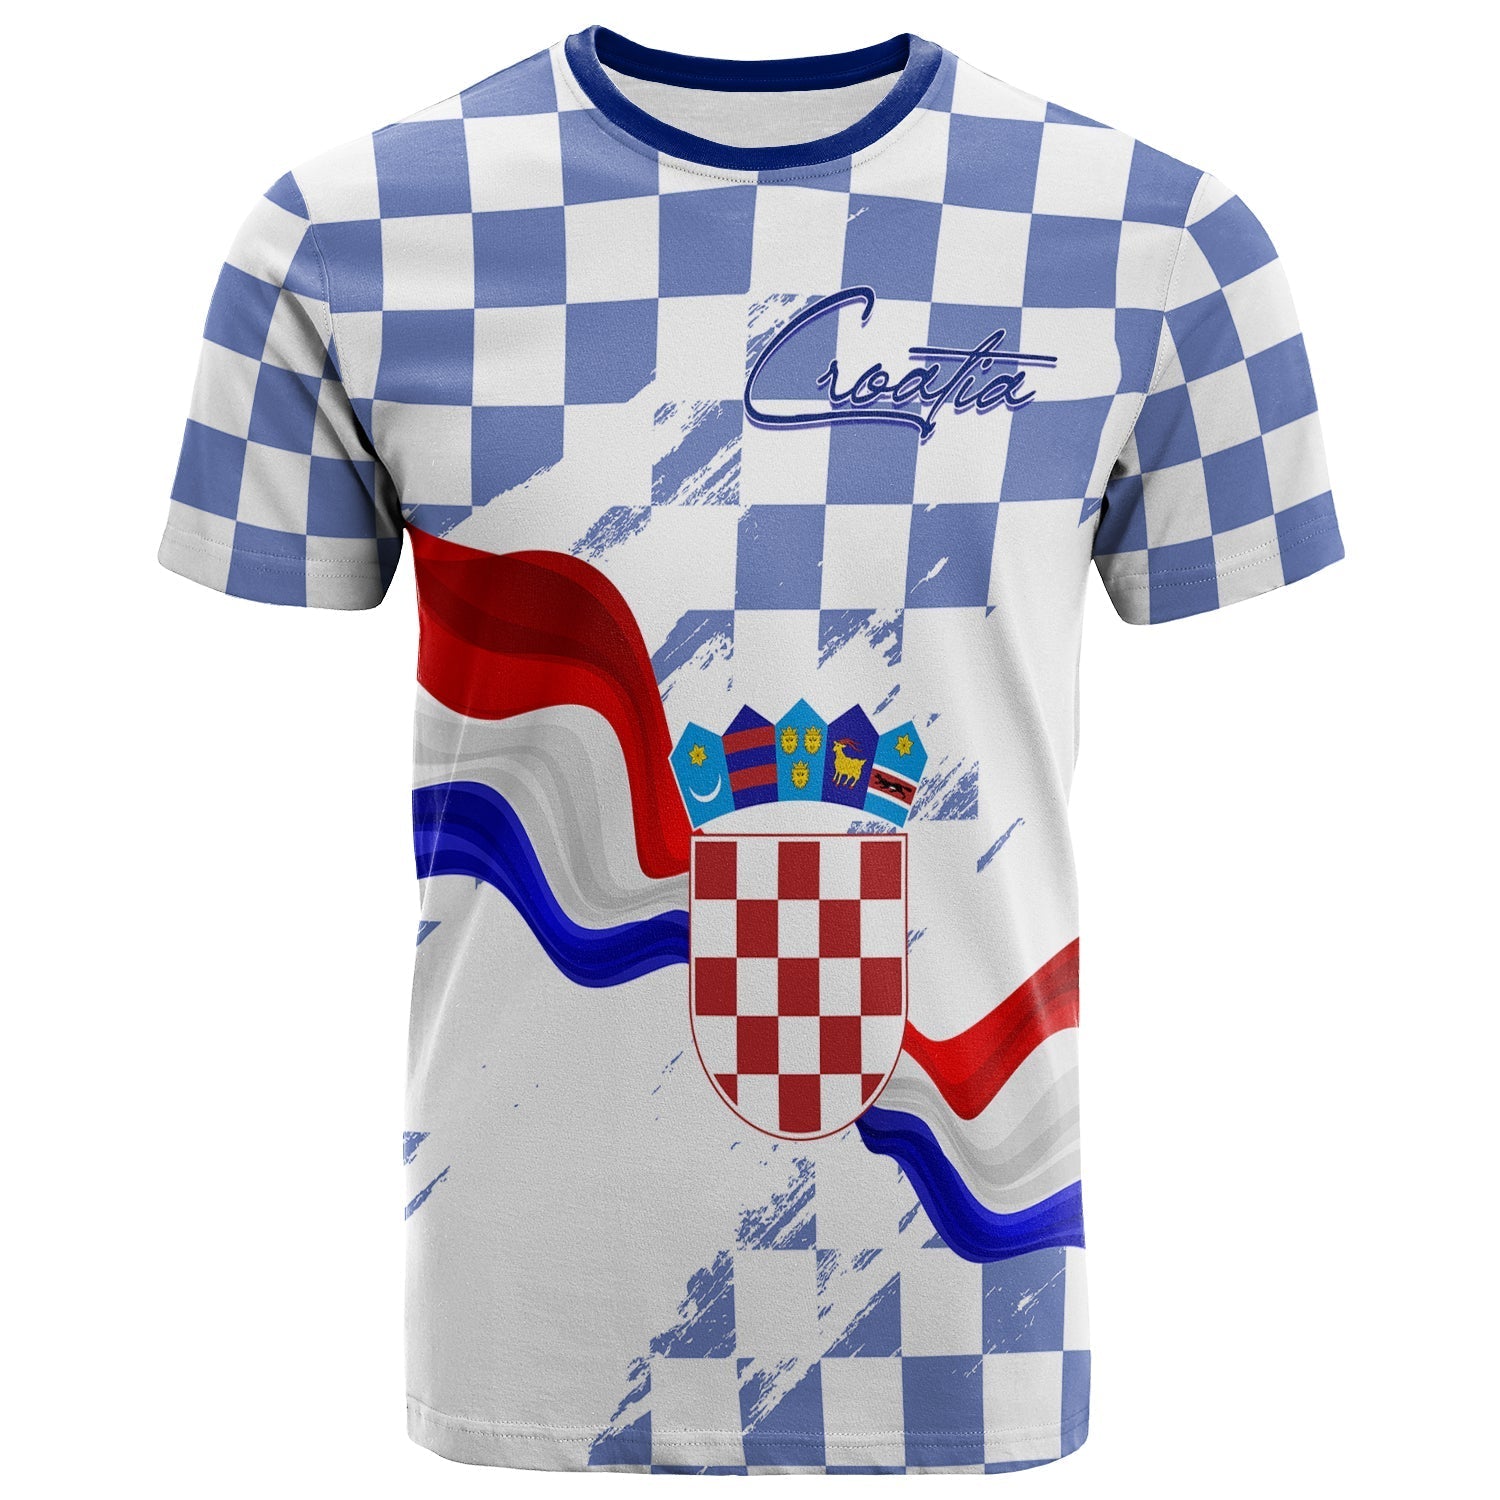 croatia-t-shirt-checkerboard-grunge-style-blue-color